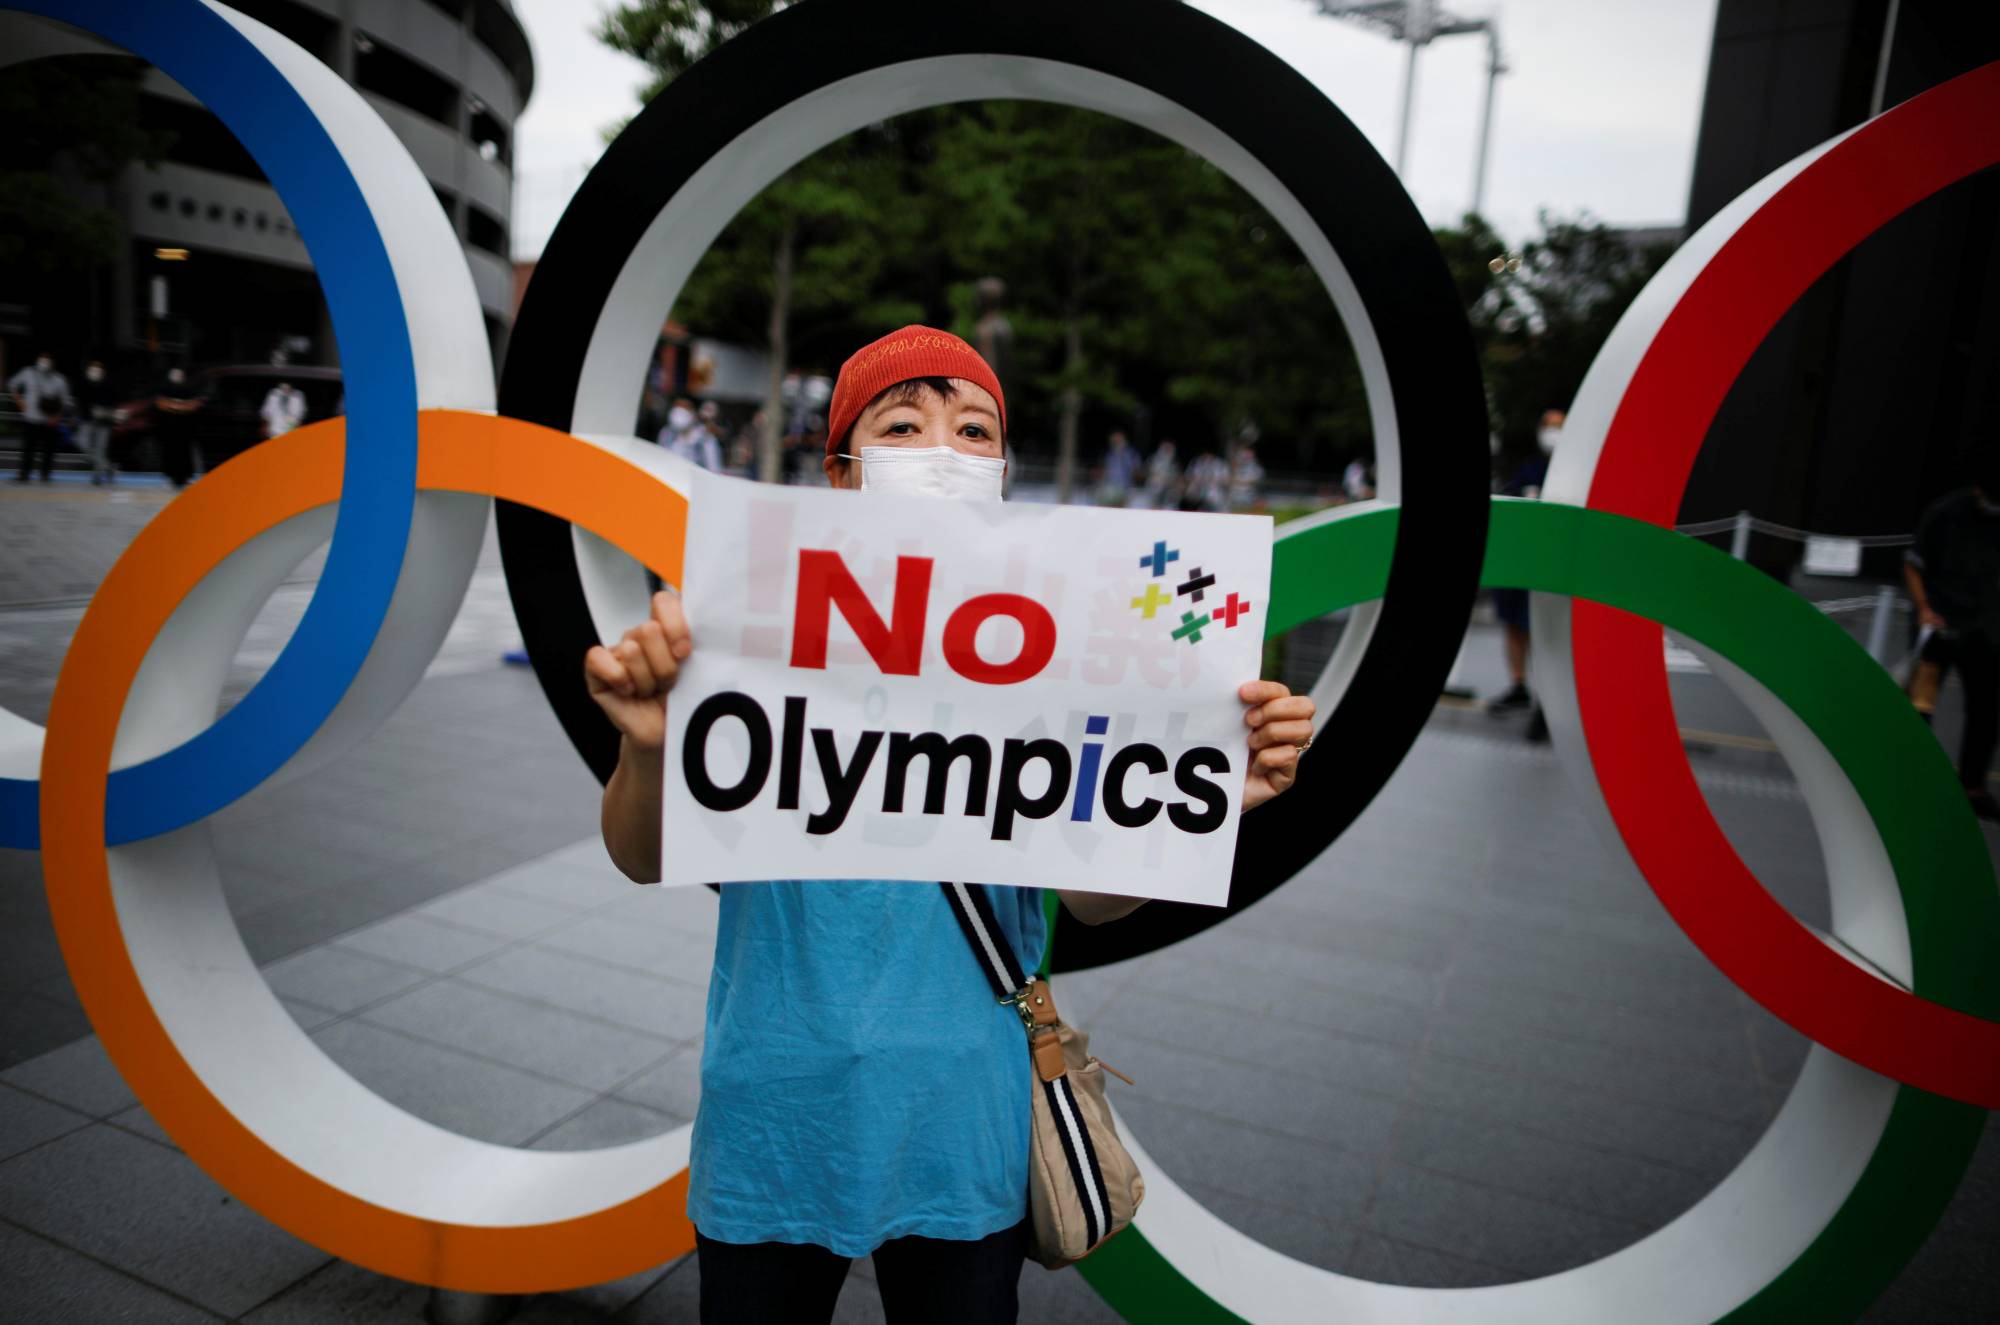 Armour: As Concerns Over Olympics Grow, Tokyo Organizers Say Games Will Go On